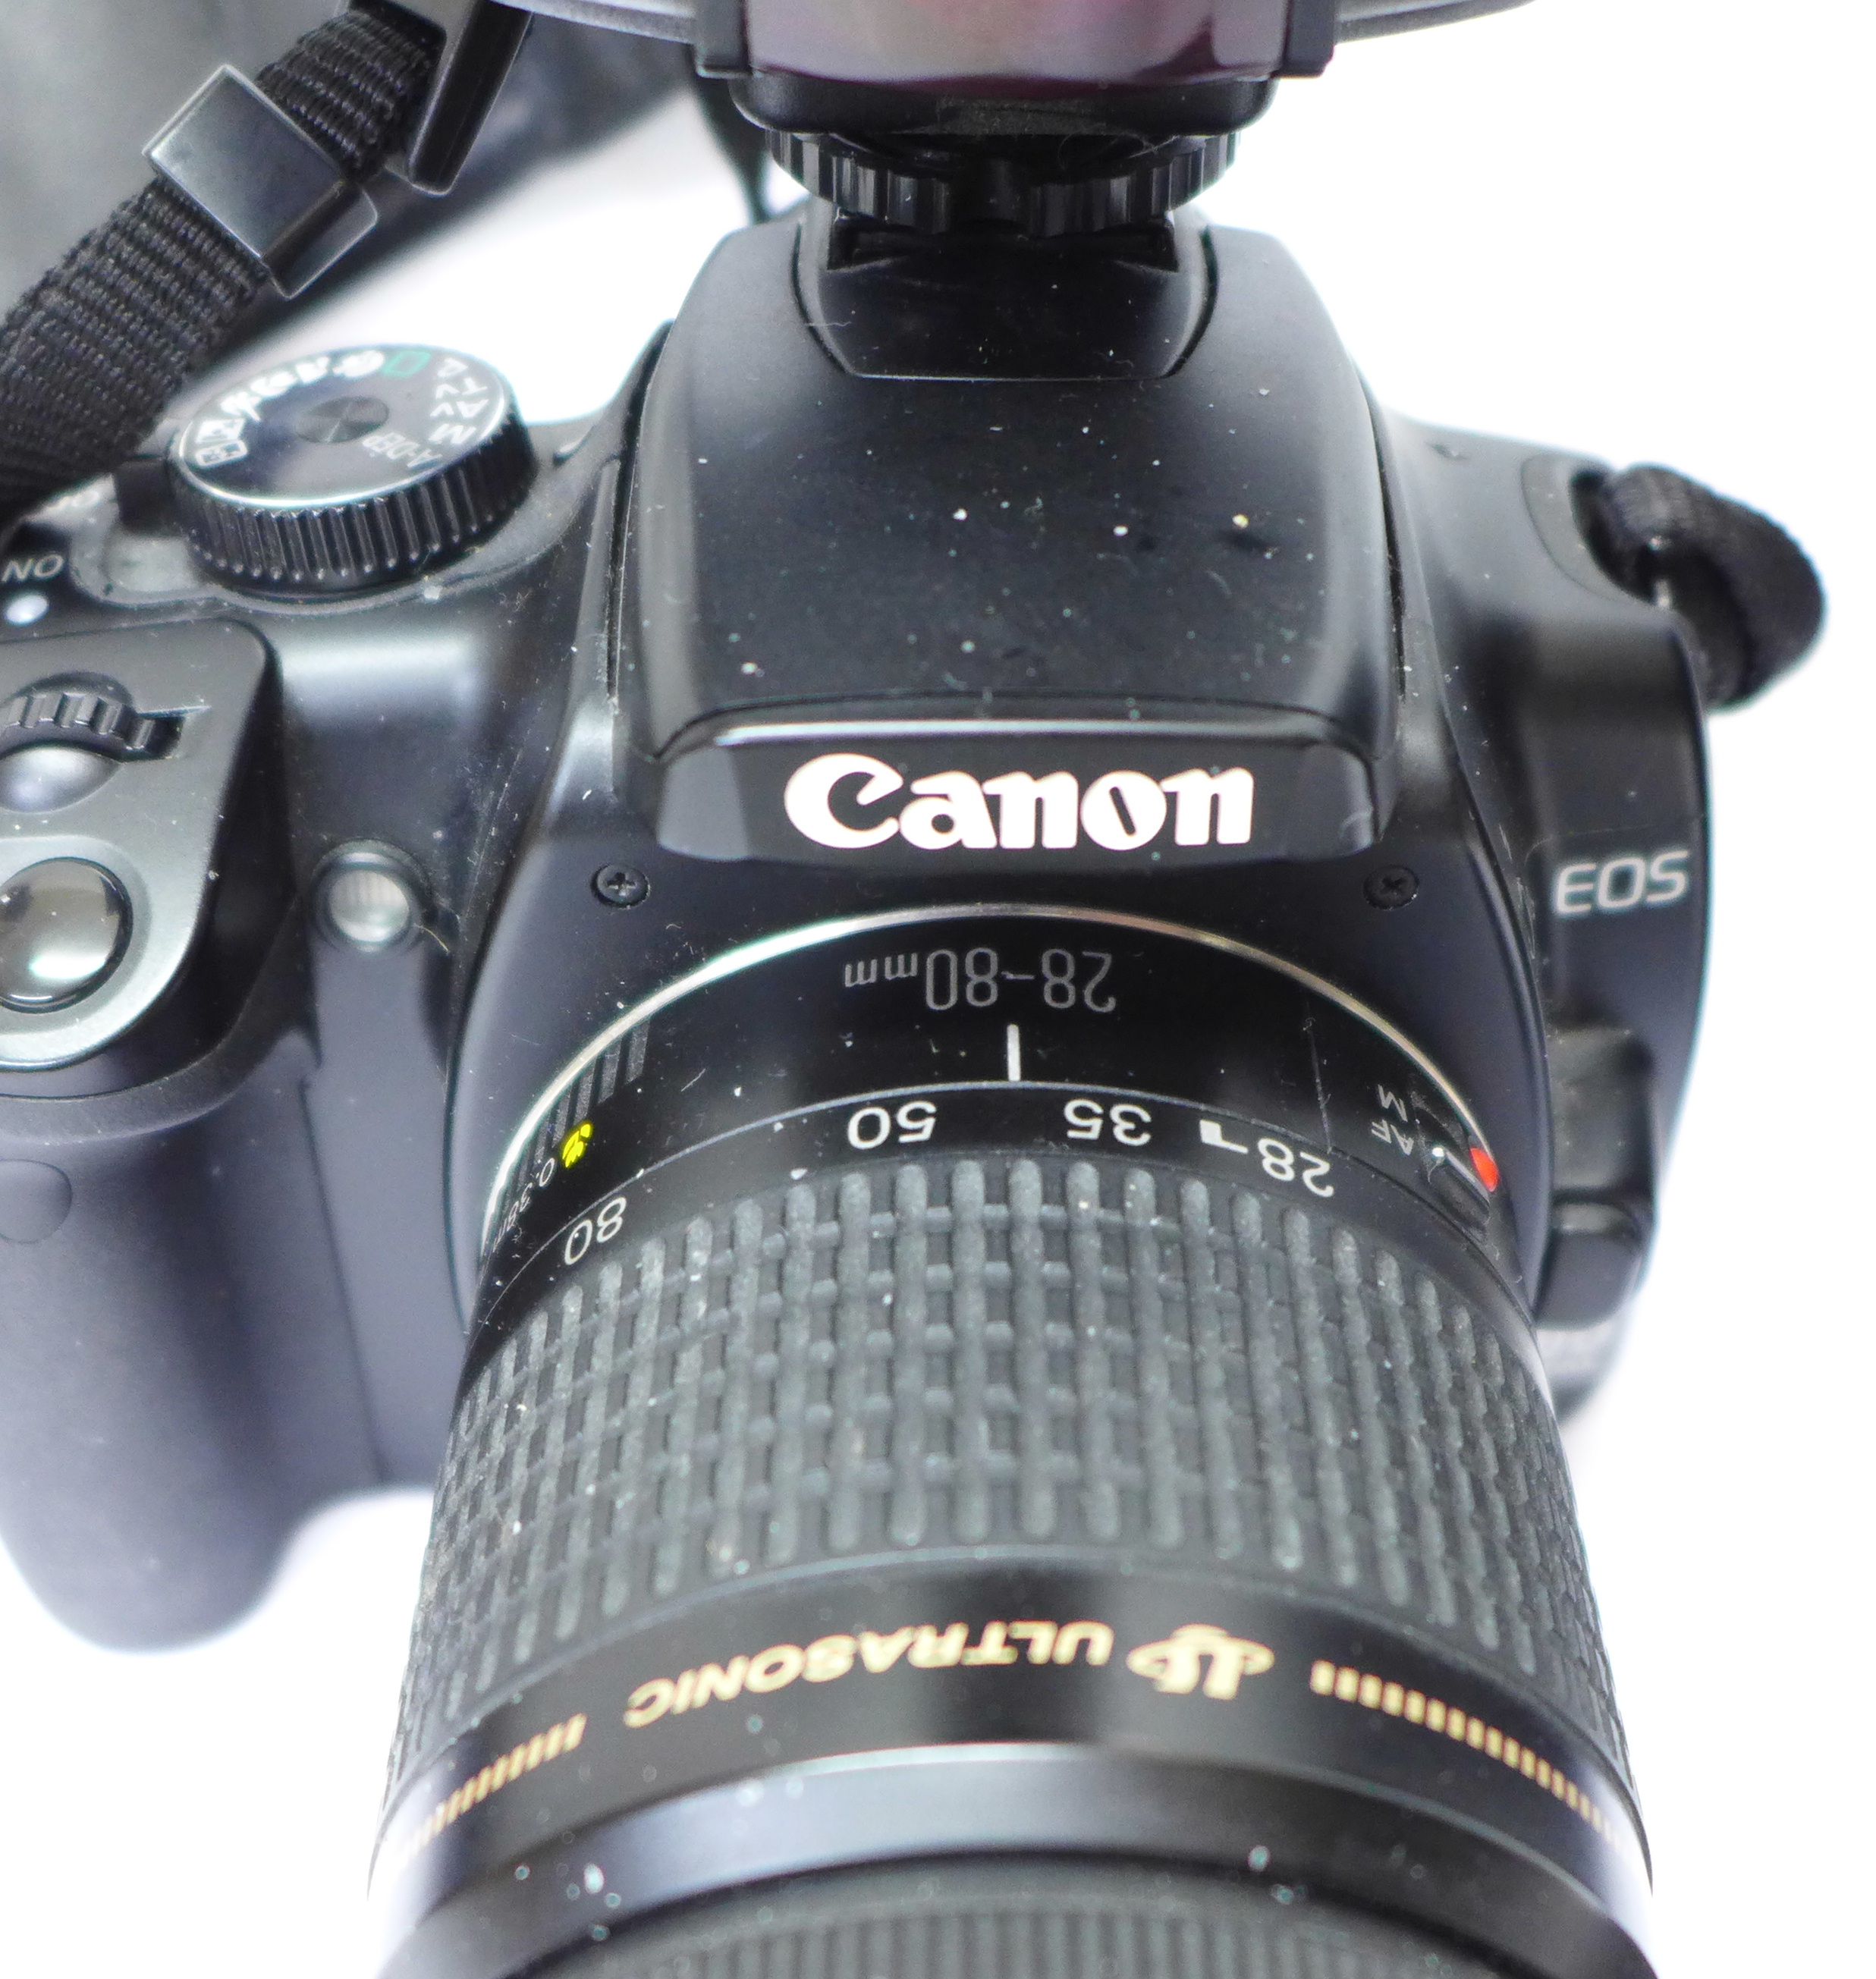 A Canon EOS 400D camera, a Canon 75-300mm f4.0-5.6 II and Canon 28-80mm f3.5-5.6 III Ultrasonic zoom - Image 2 of 6